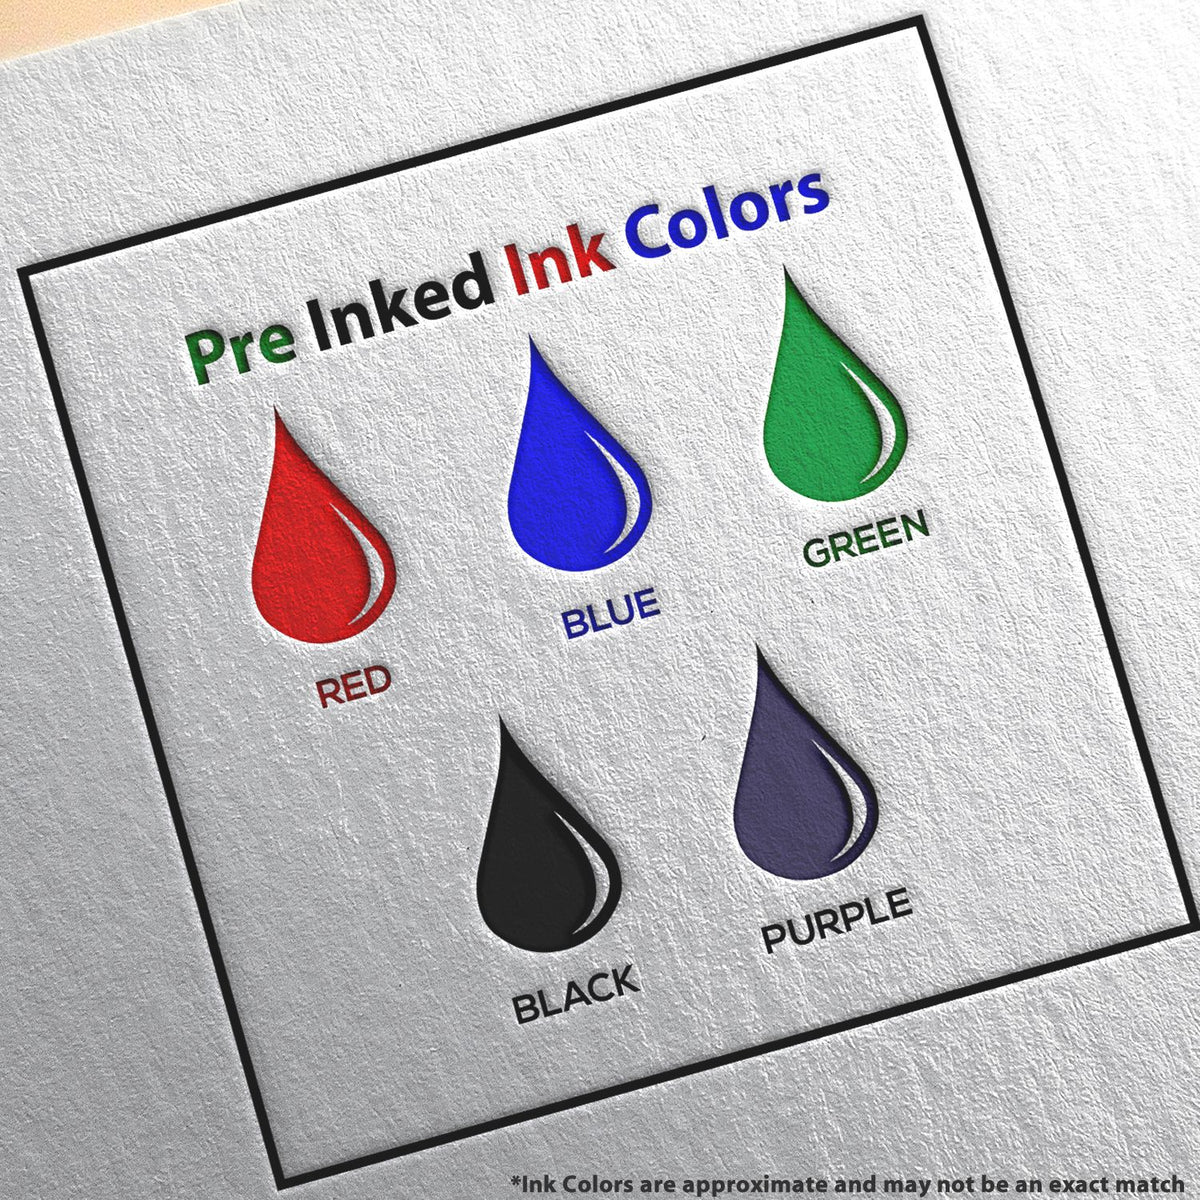 A picture showing the different ink colors or hues available for the Slim Pre-Inked New Jersey Land Surveyor Seal Stamp product.